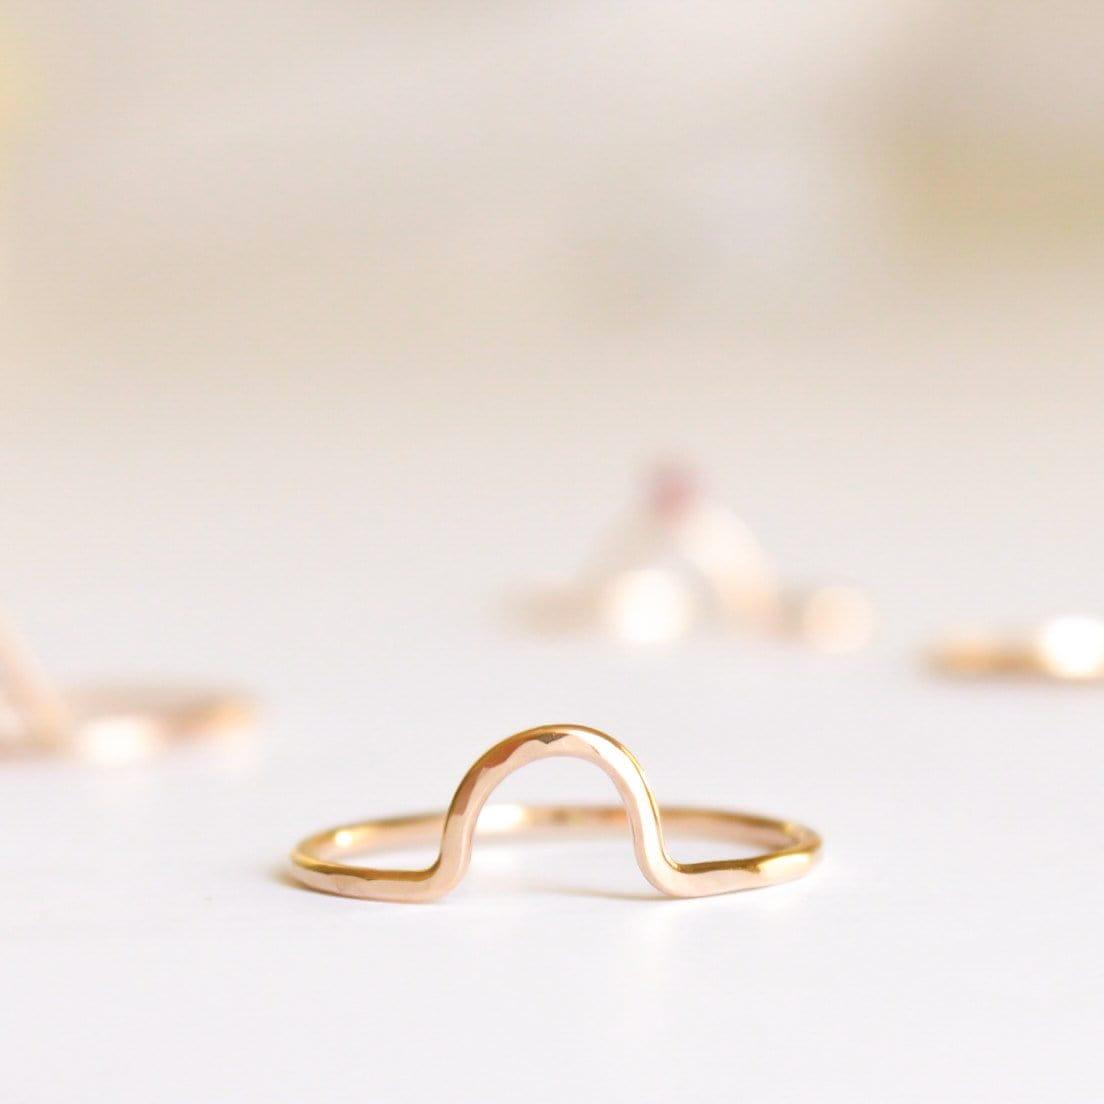 Small Arch Ring - Nolia Jewelry - Meaningful + Sustainably Handcrafted Jewelry